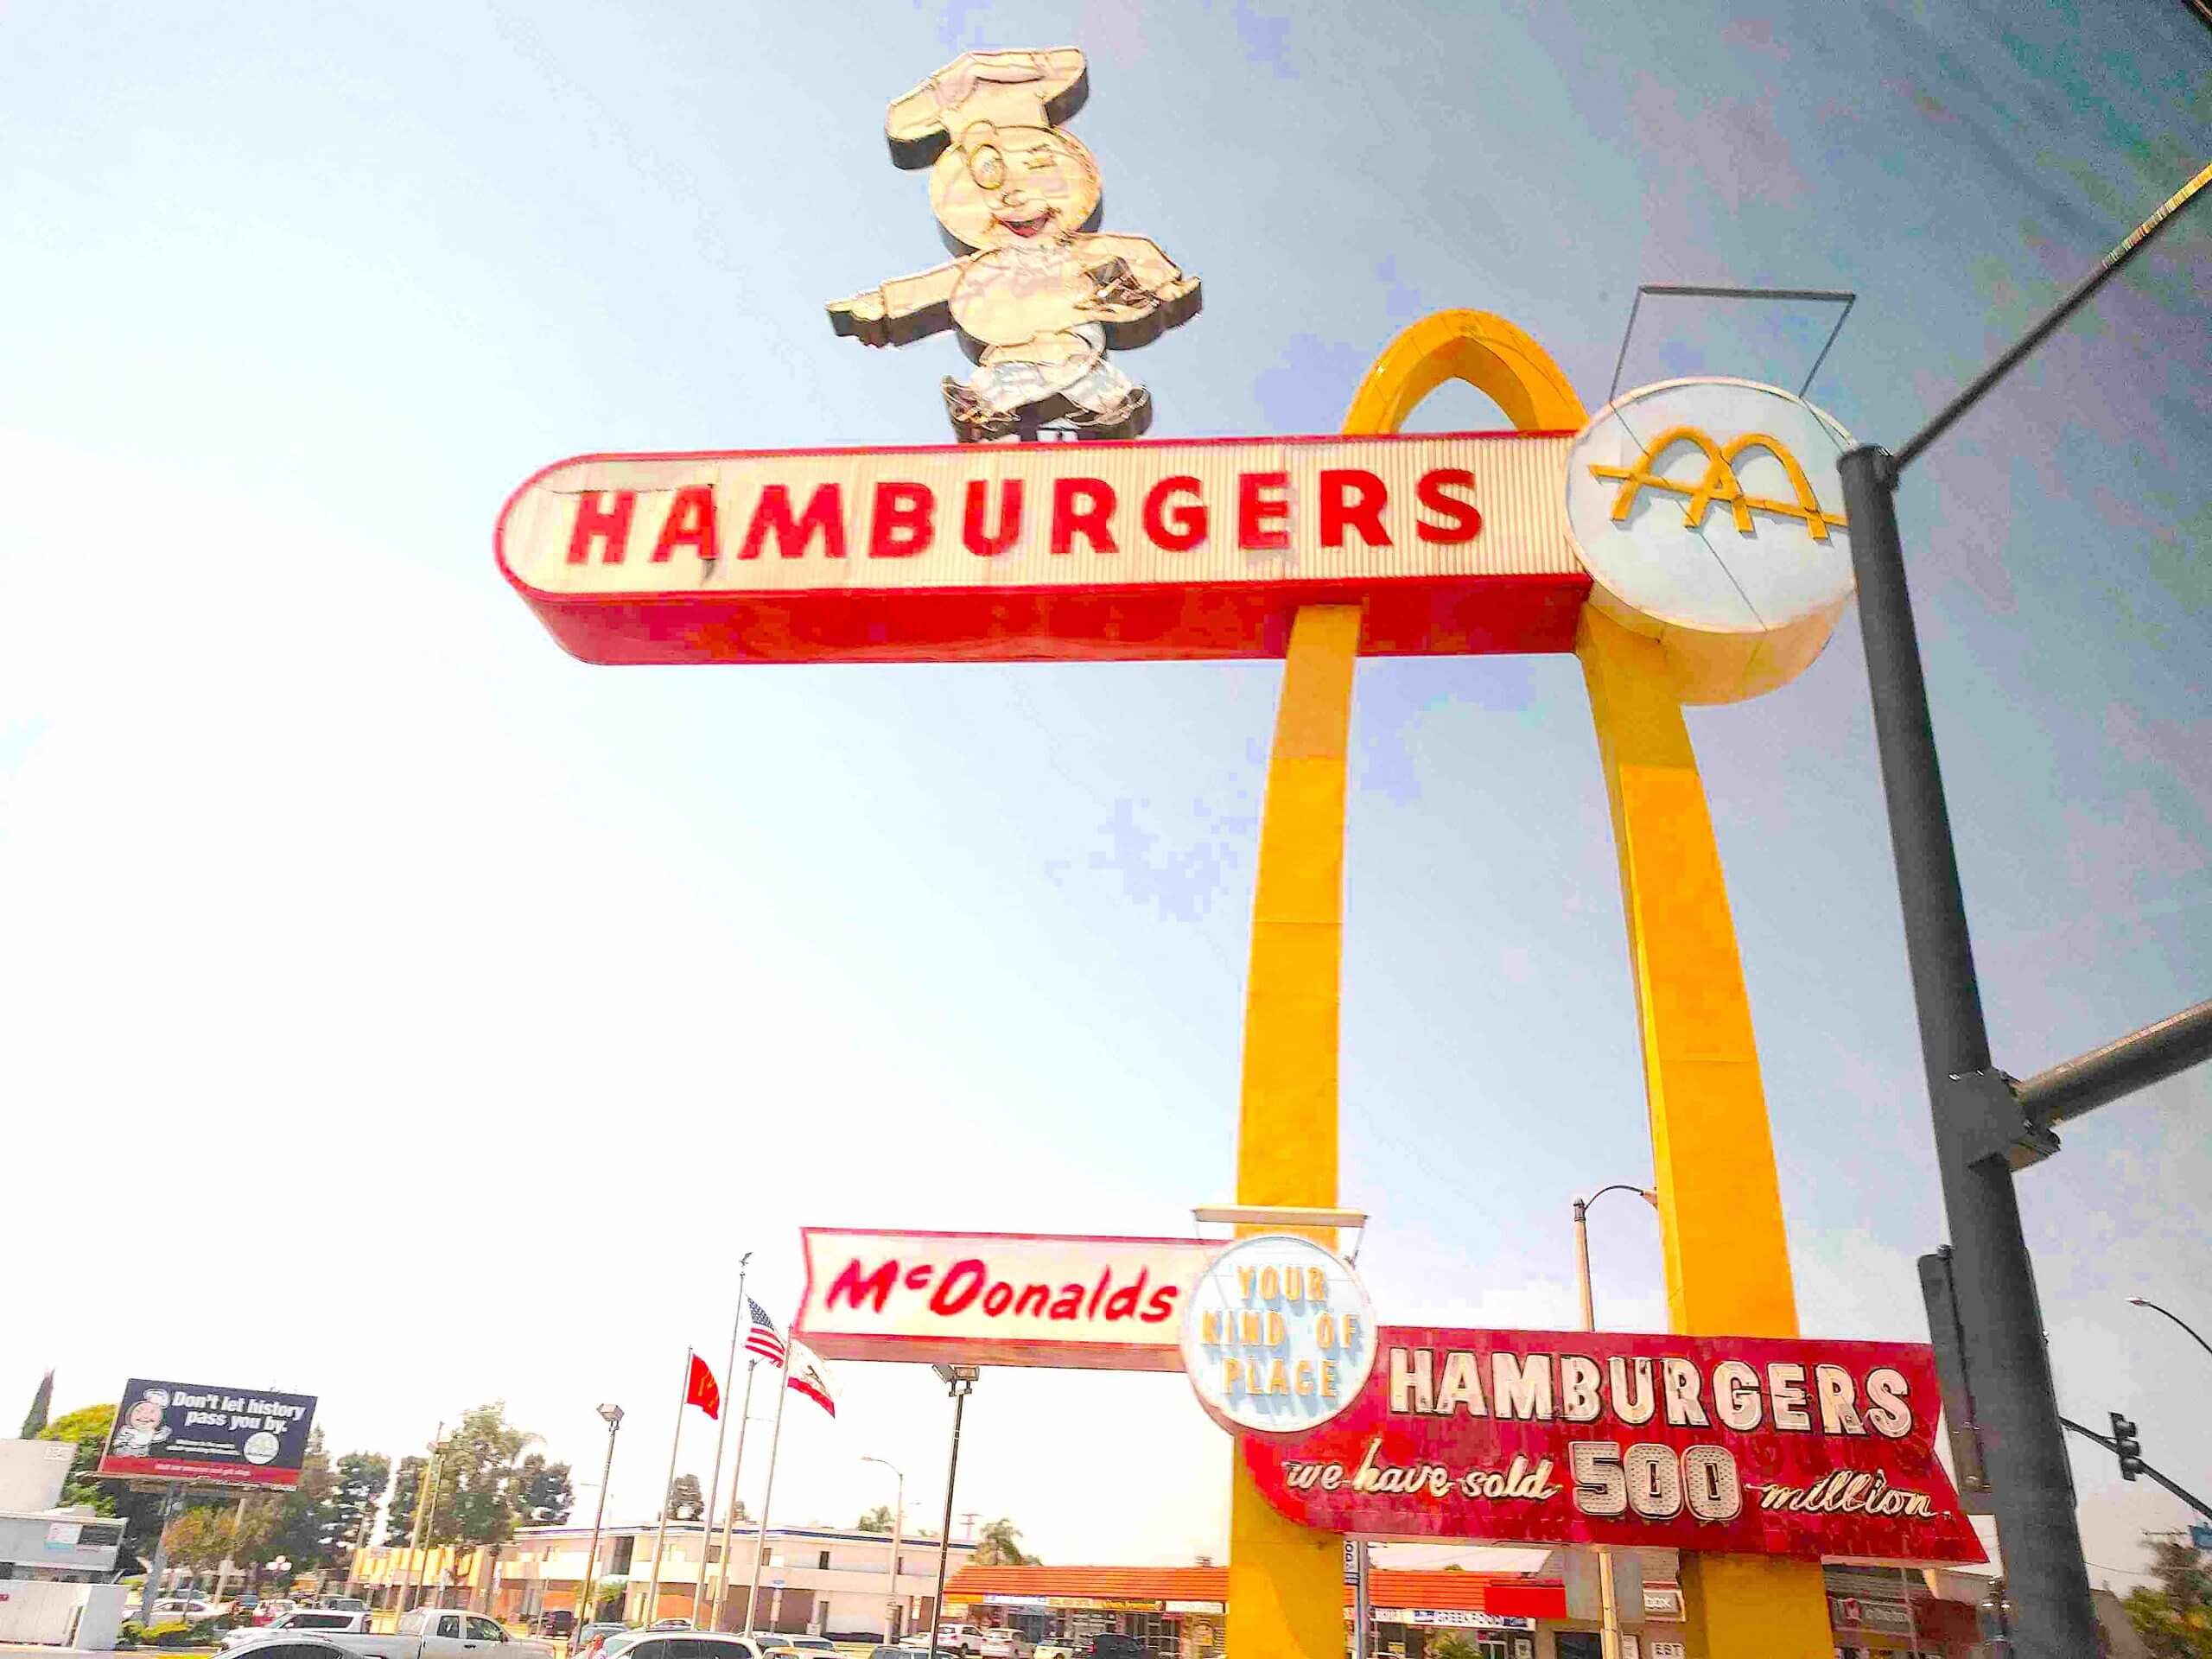 South L.A. Road Trip: Hot Rods, Adobes, Googie & Aerospace